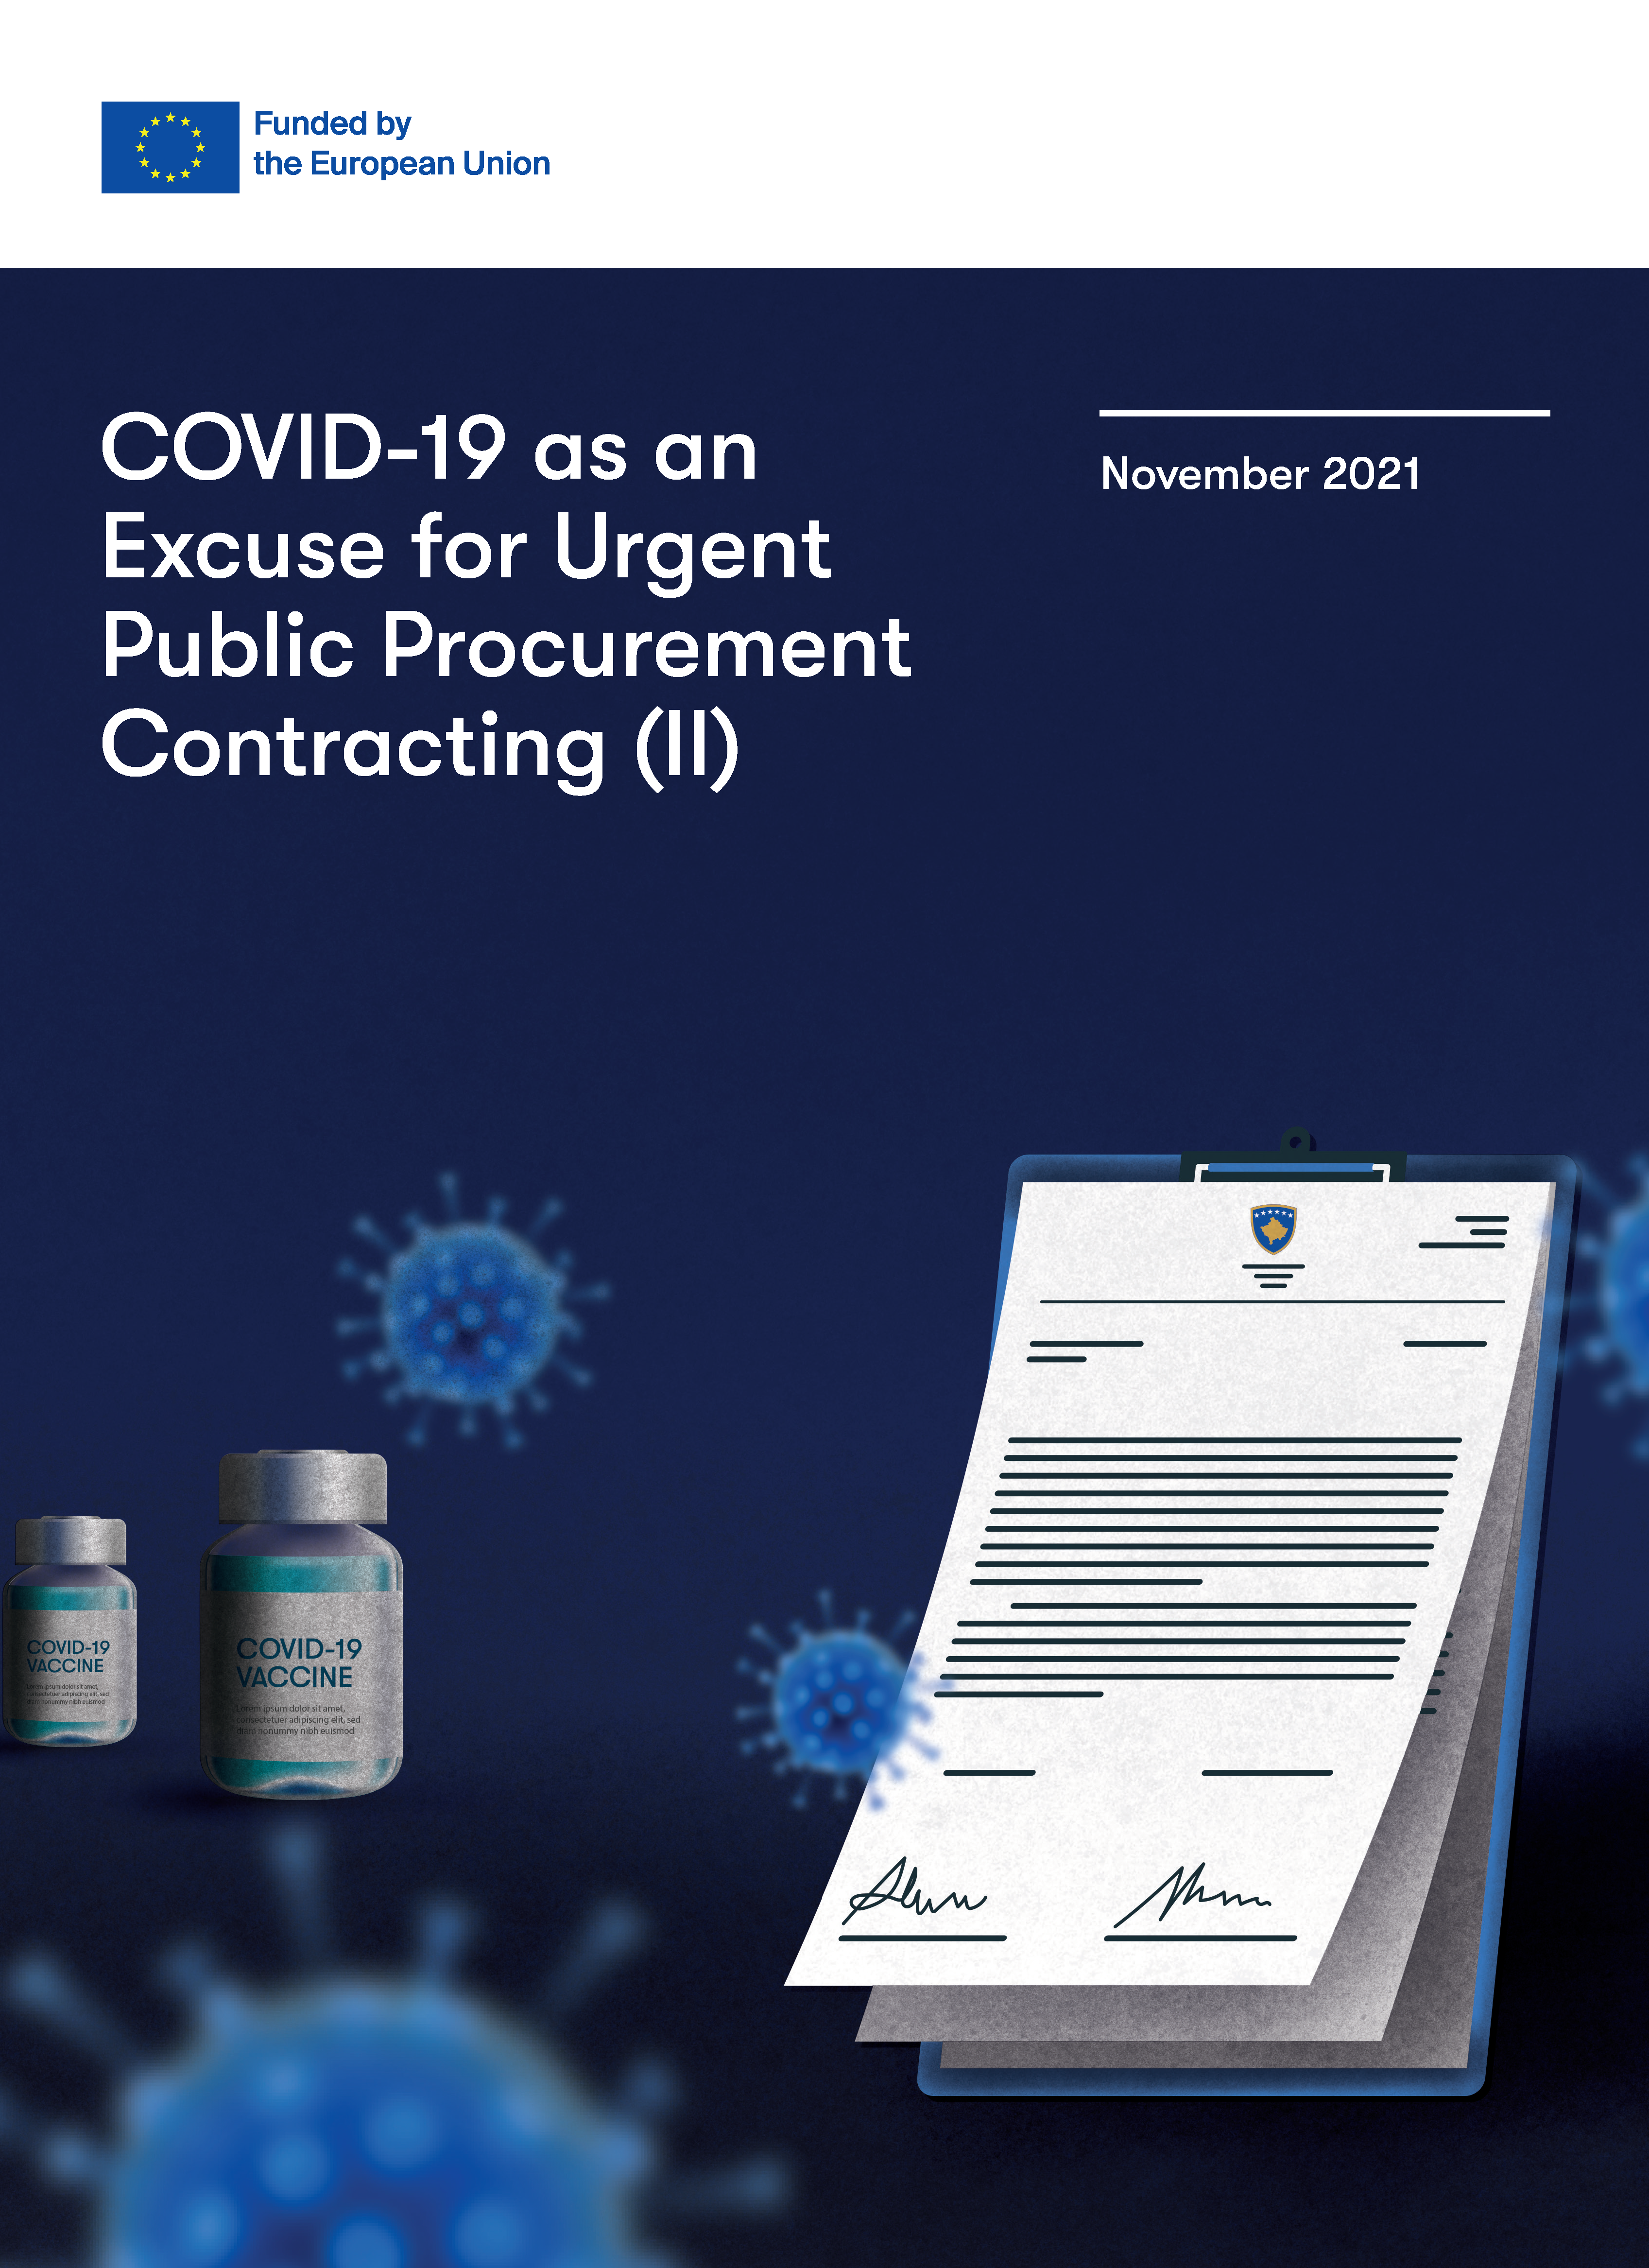 COVID-19 as an Excuse for Urgent Public Procurement Contracting (II)